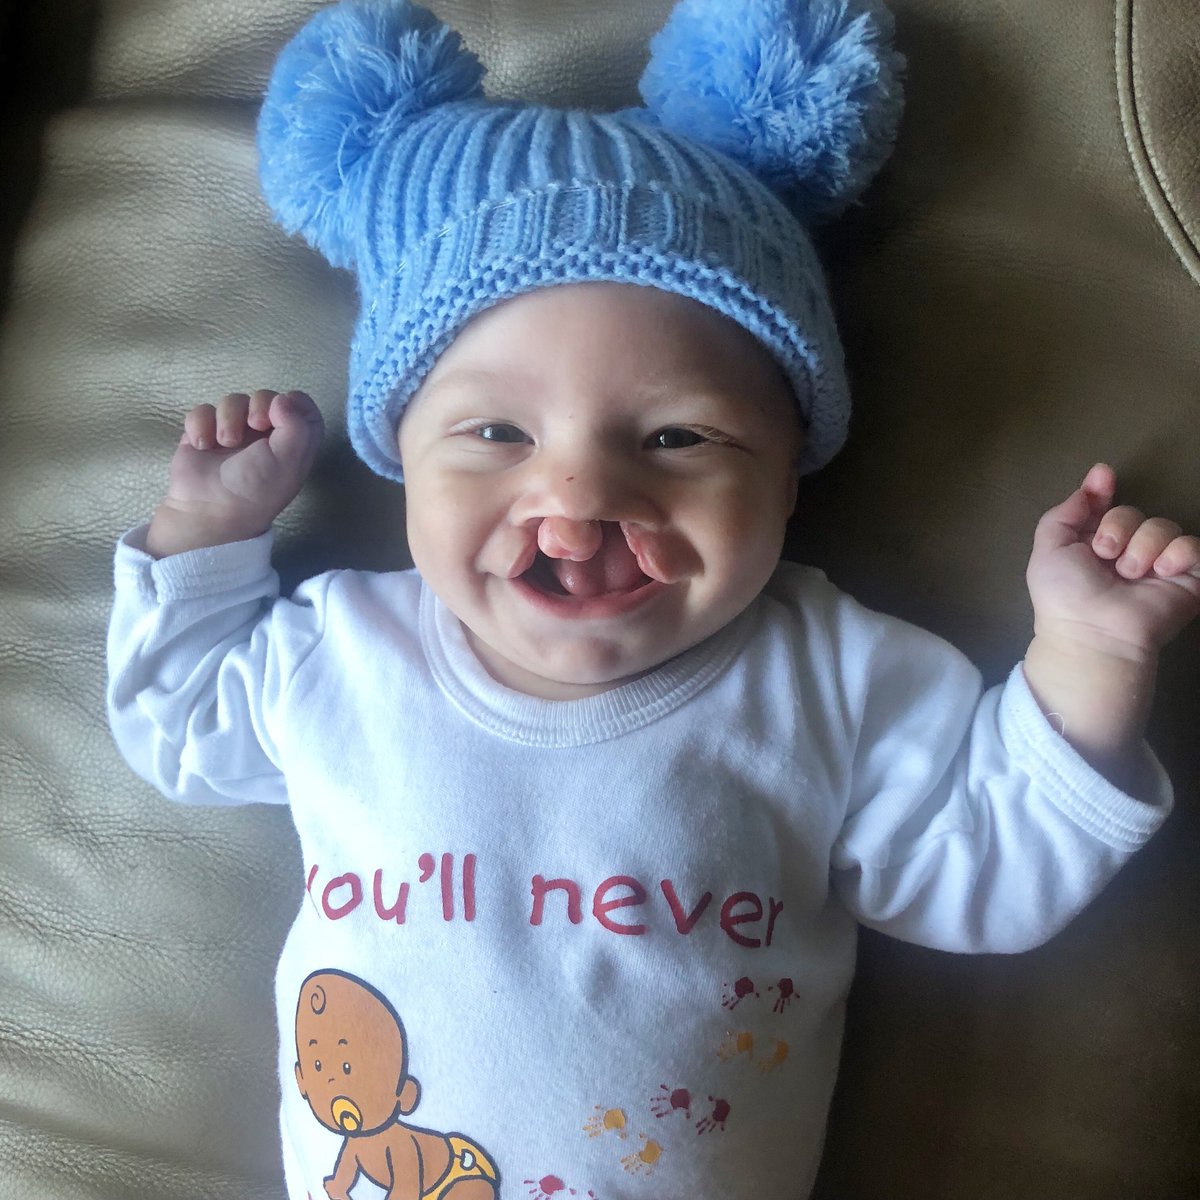 ⭐ 4th-12th May is Cleft Lip and Palate Awareness Week ⭐ Visit CLAPA's Awareness Week Hub at buff.ly/3x7Ubty and help spread the word! Find out more from our Annual Report Summary 👉 buff.ly/4d6yhHJ #CleftAware @CLAPACOMMUNITY